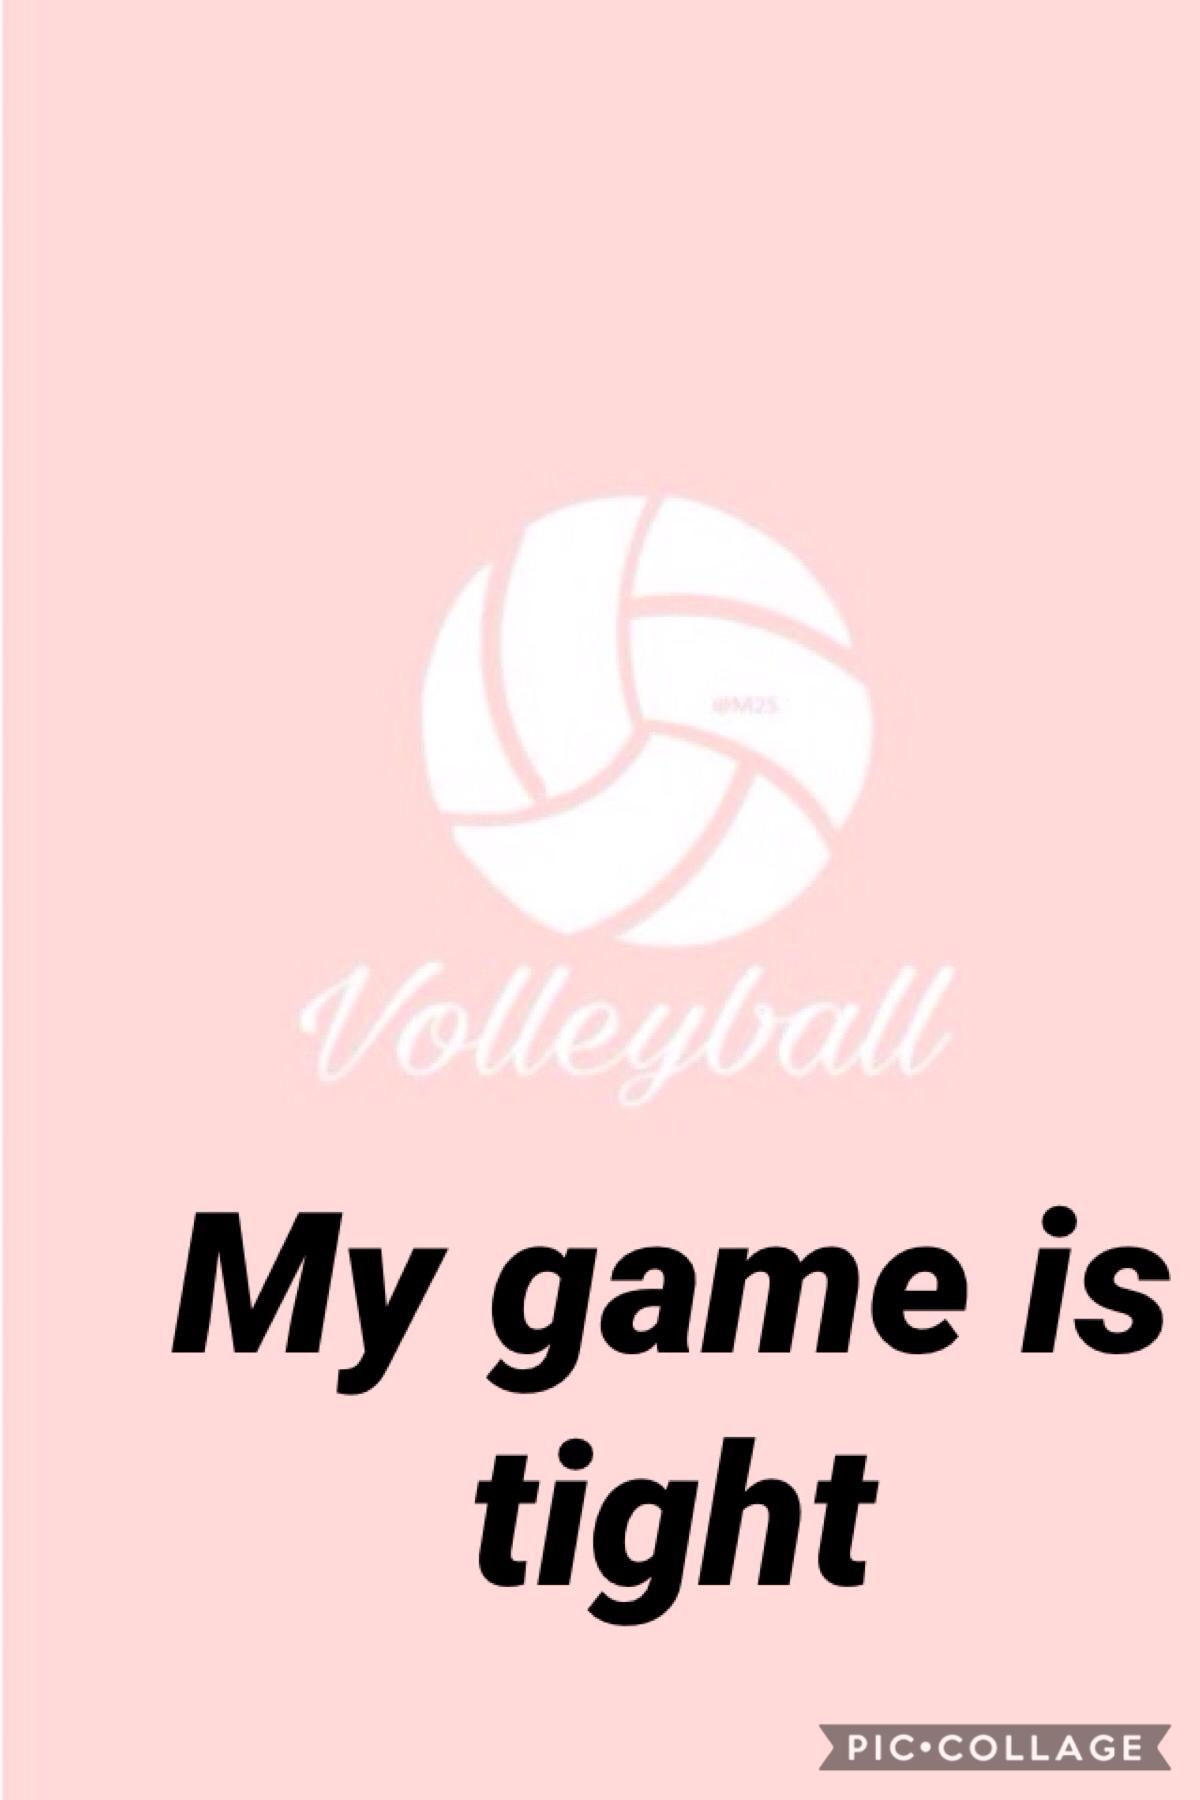 So I am a athlete and I love to play volley ball and swim tell me what sports you play